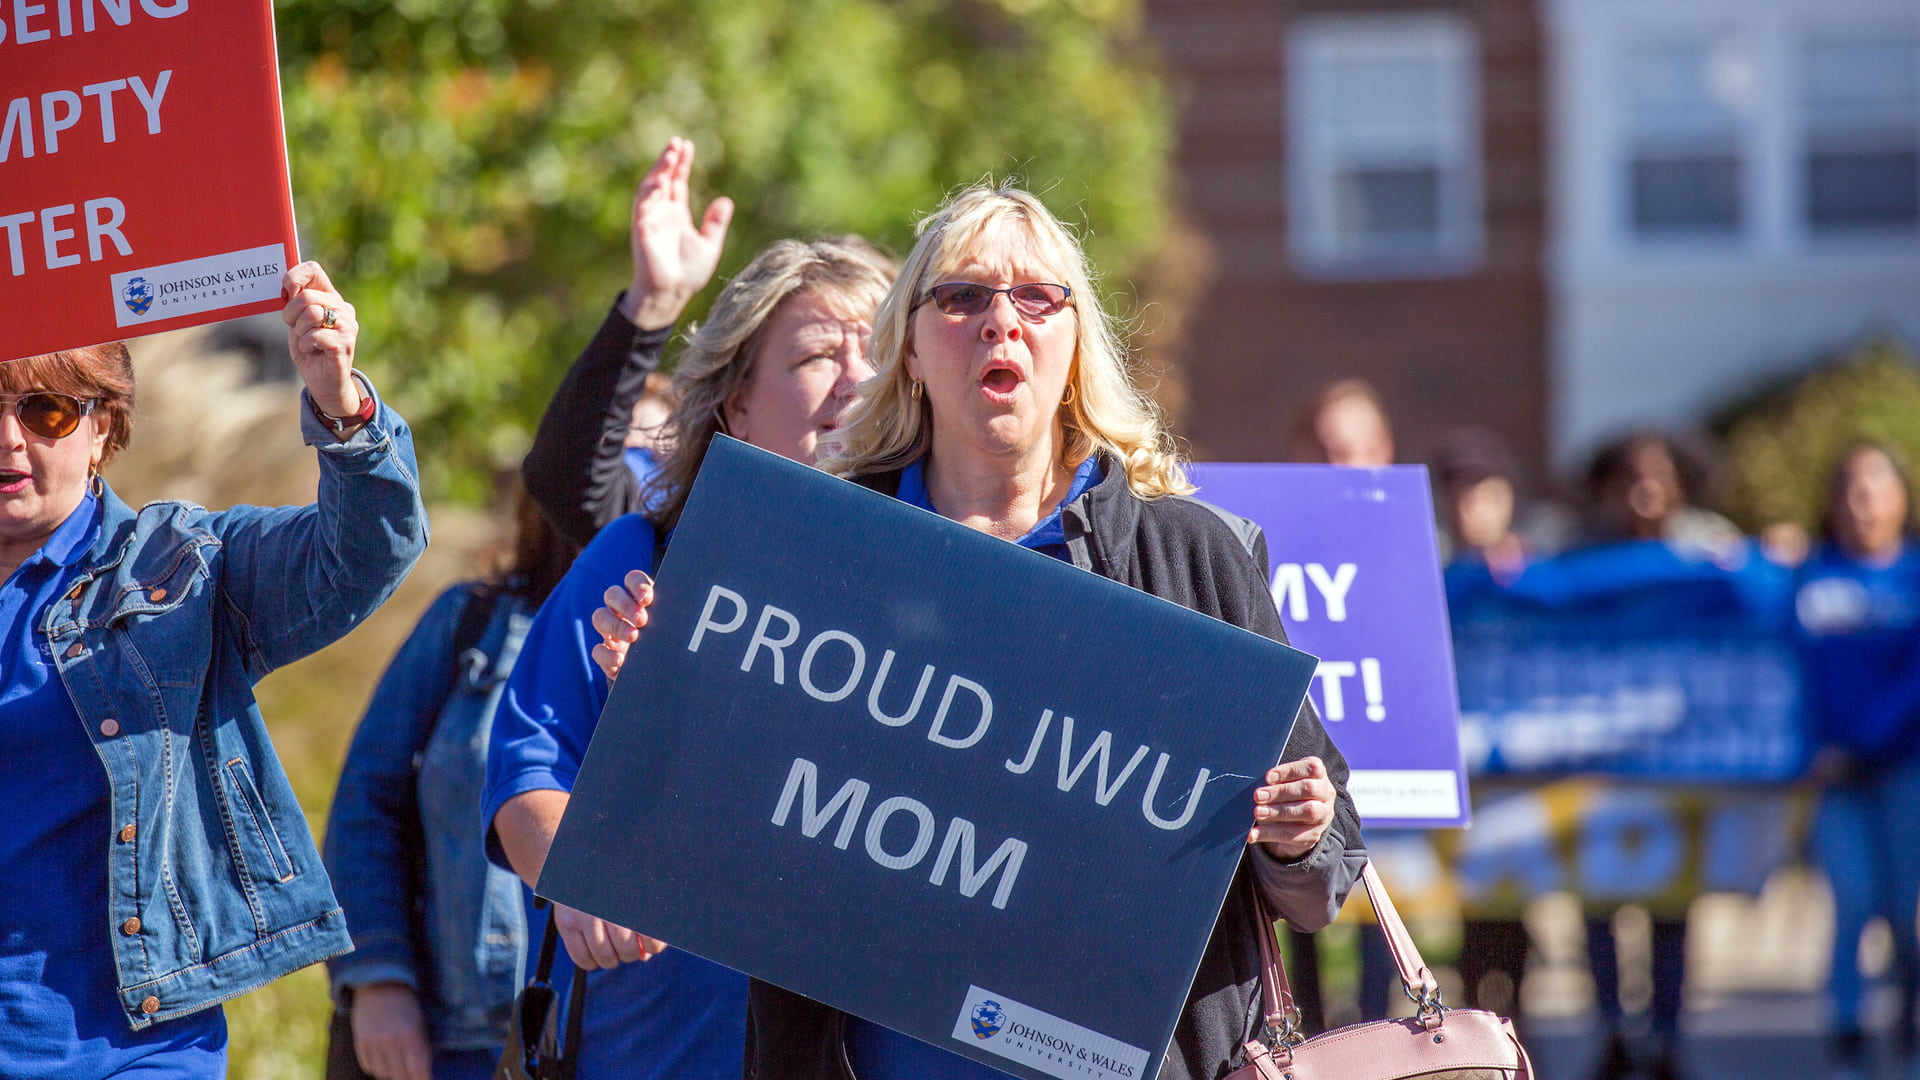 Proud JWU Mom walking in the annual Homecoming and Family Weekend parade. 